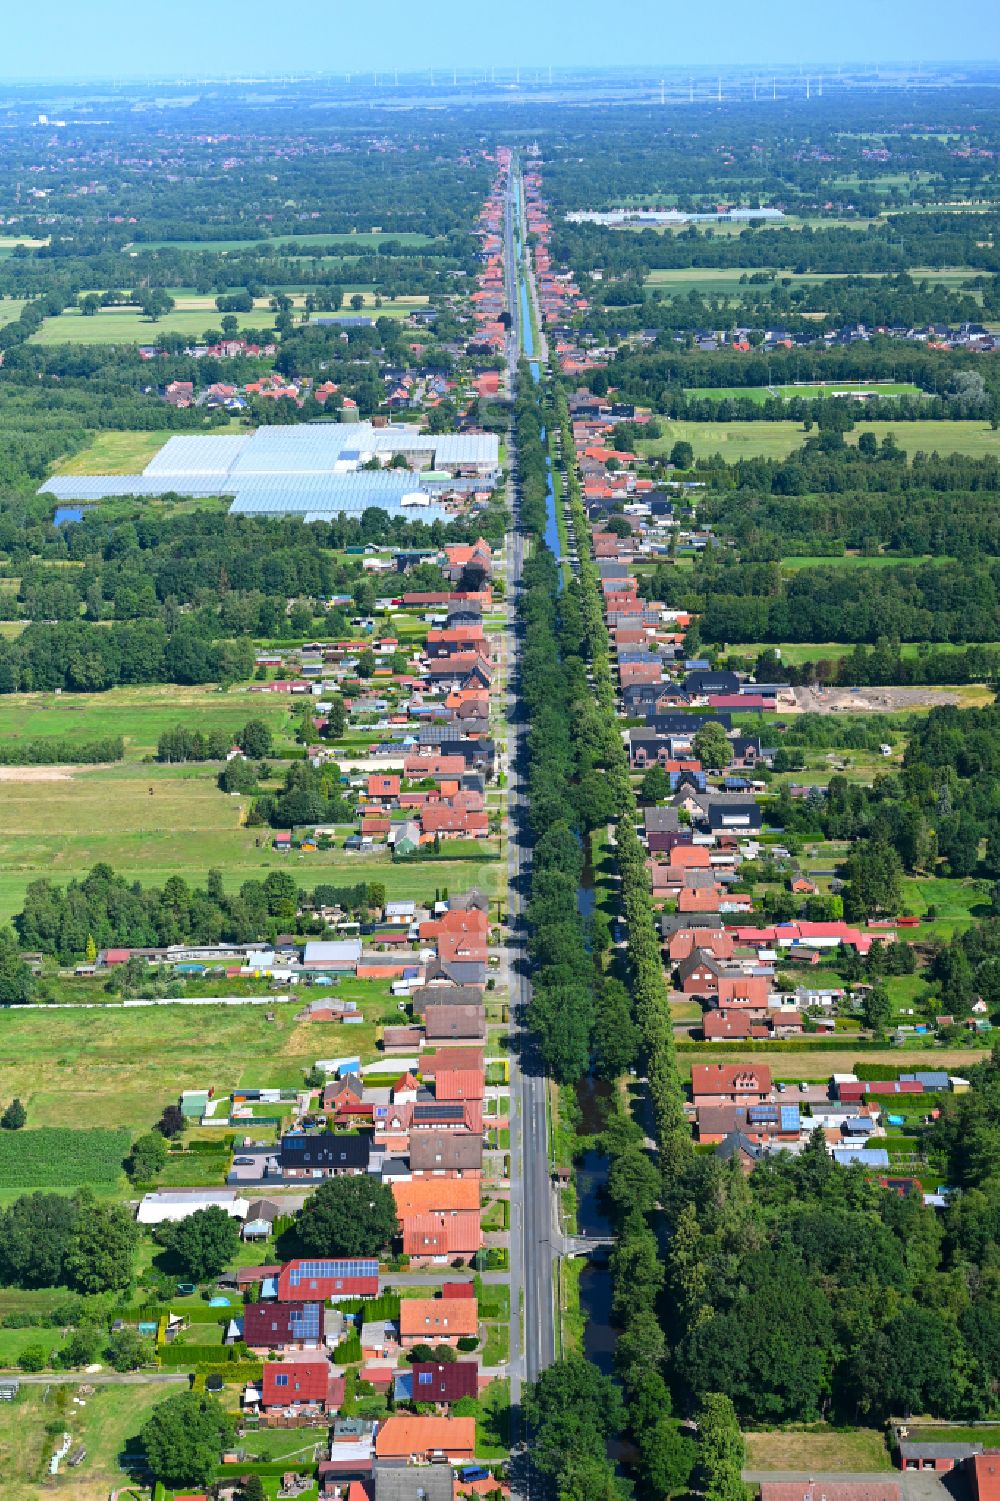 Aerial image Papenburg - Urban area with outskirts and inner city area on the edge of agricultural fields and arable land in Papenburg in the state Lower Saxony, Germany